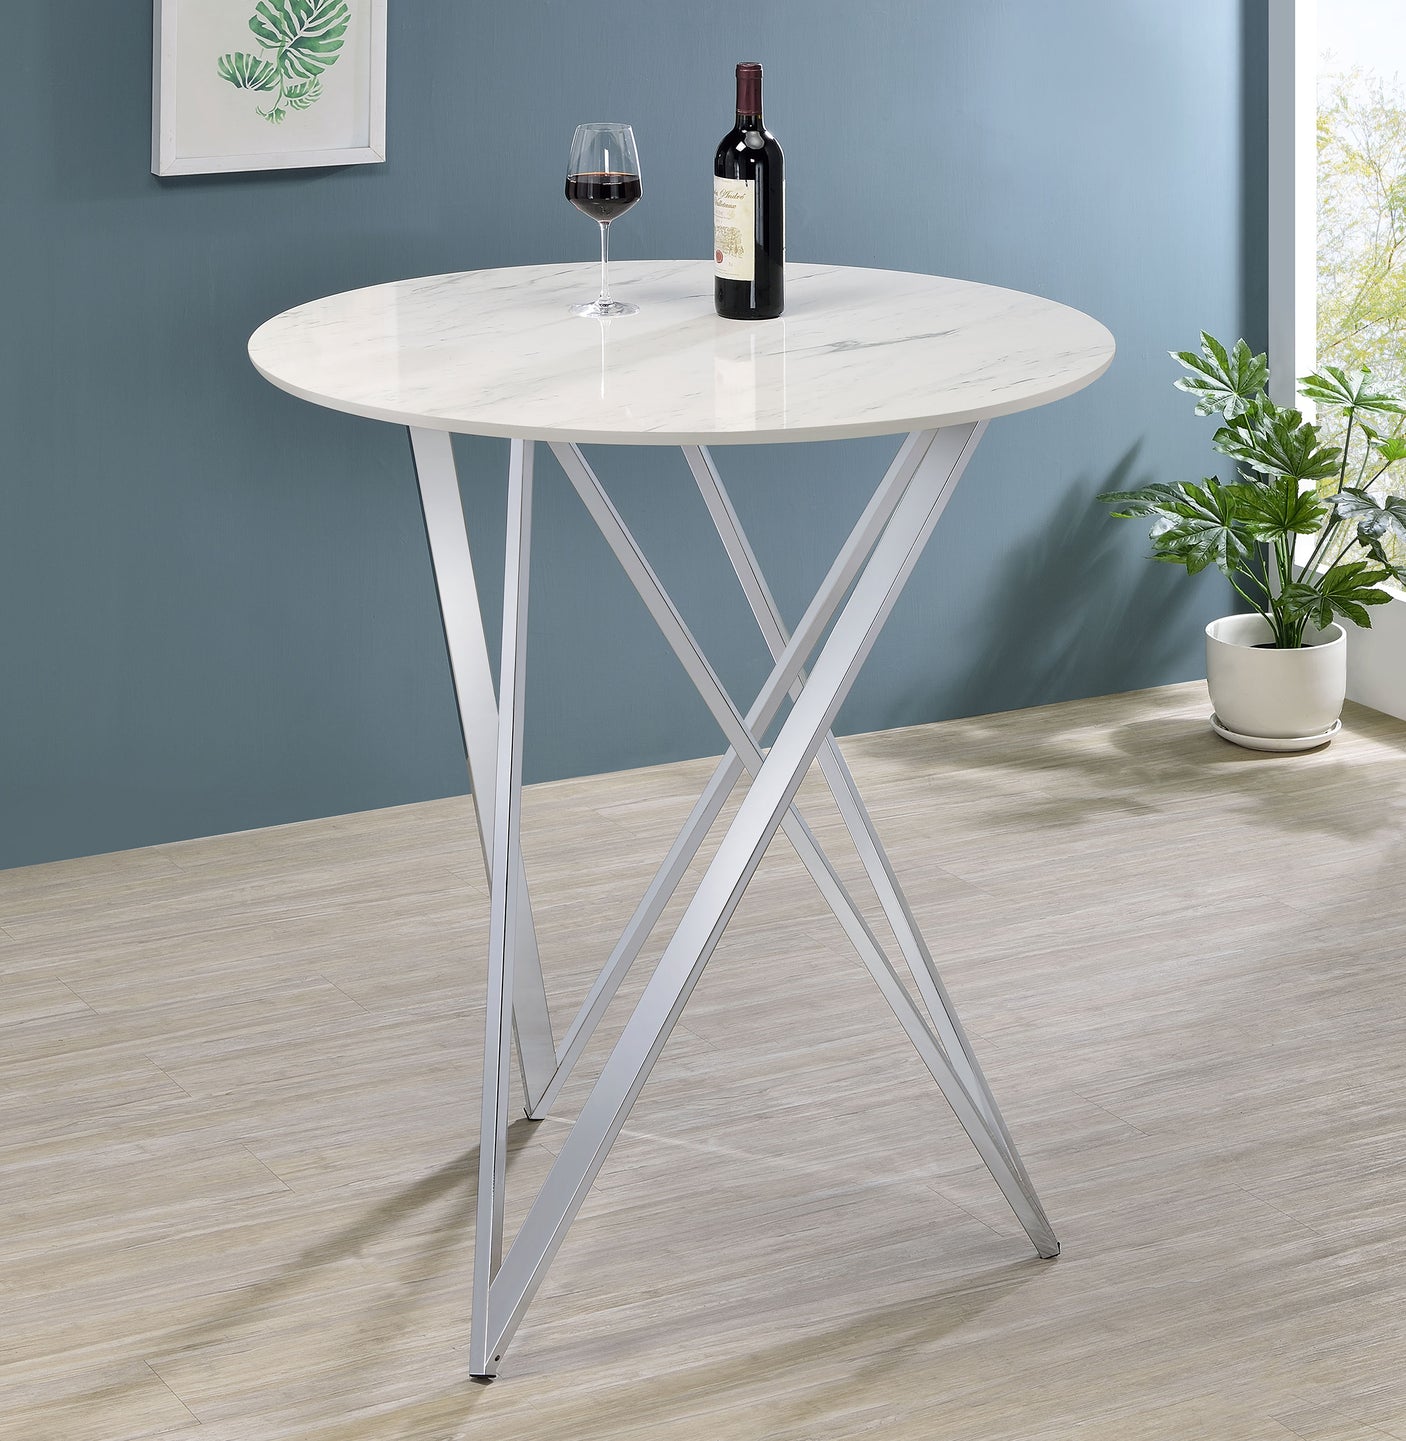 Bar Table - Bexter Faux Marble Round Top Bar Table White and Chrome